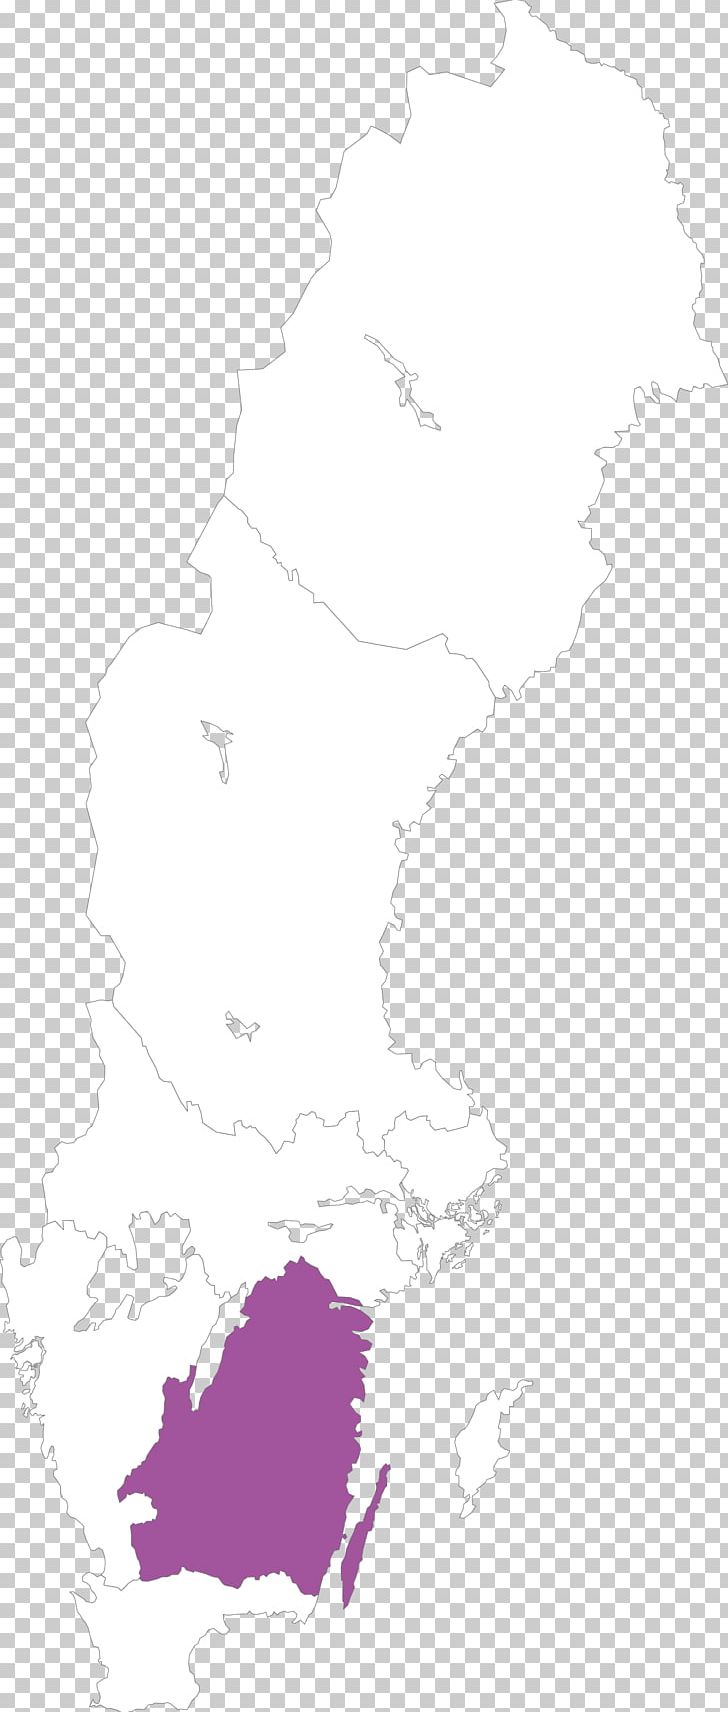 Sweden Map Tuberculosis PNG, Clipart, Area, Hela, Map, Purple, Sweden Free PNG Download